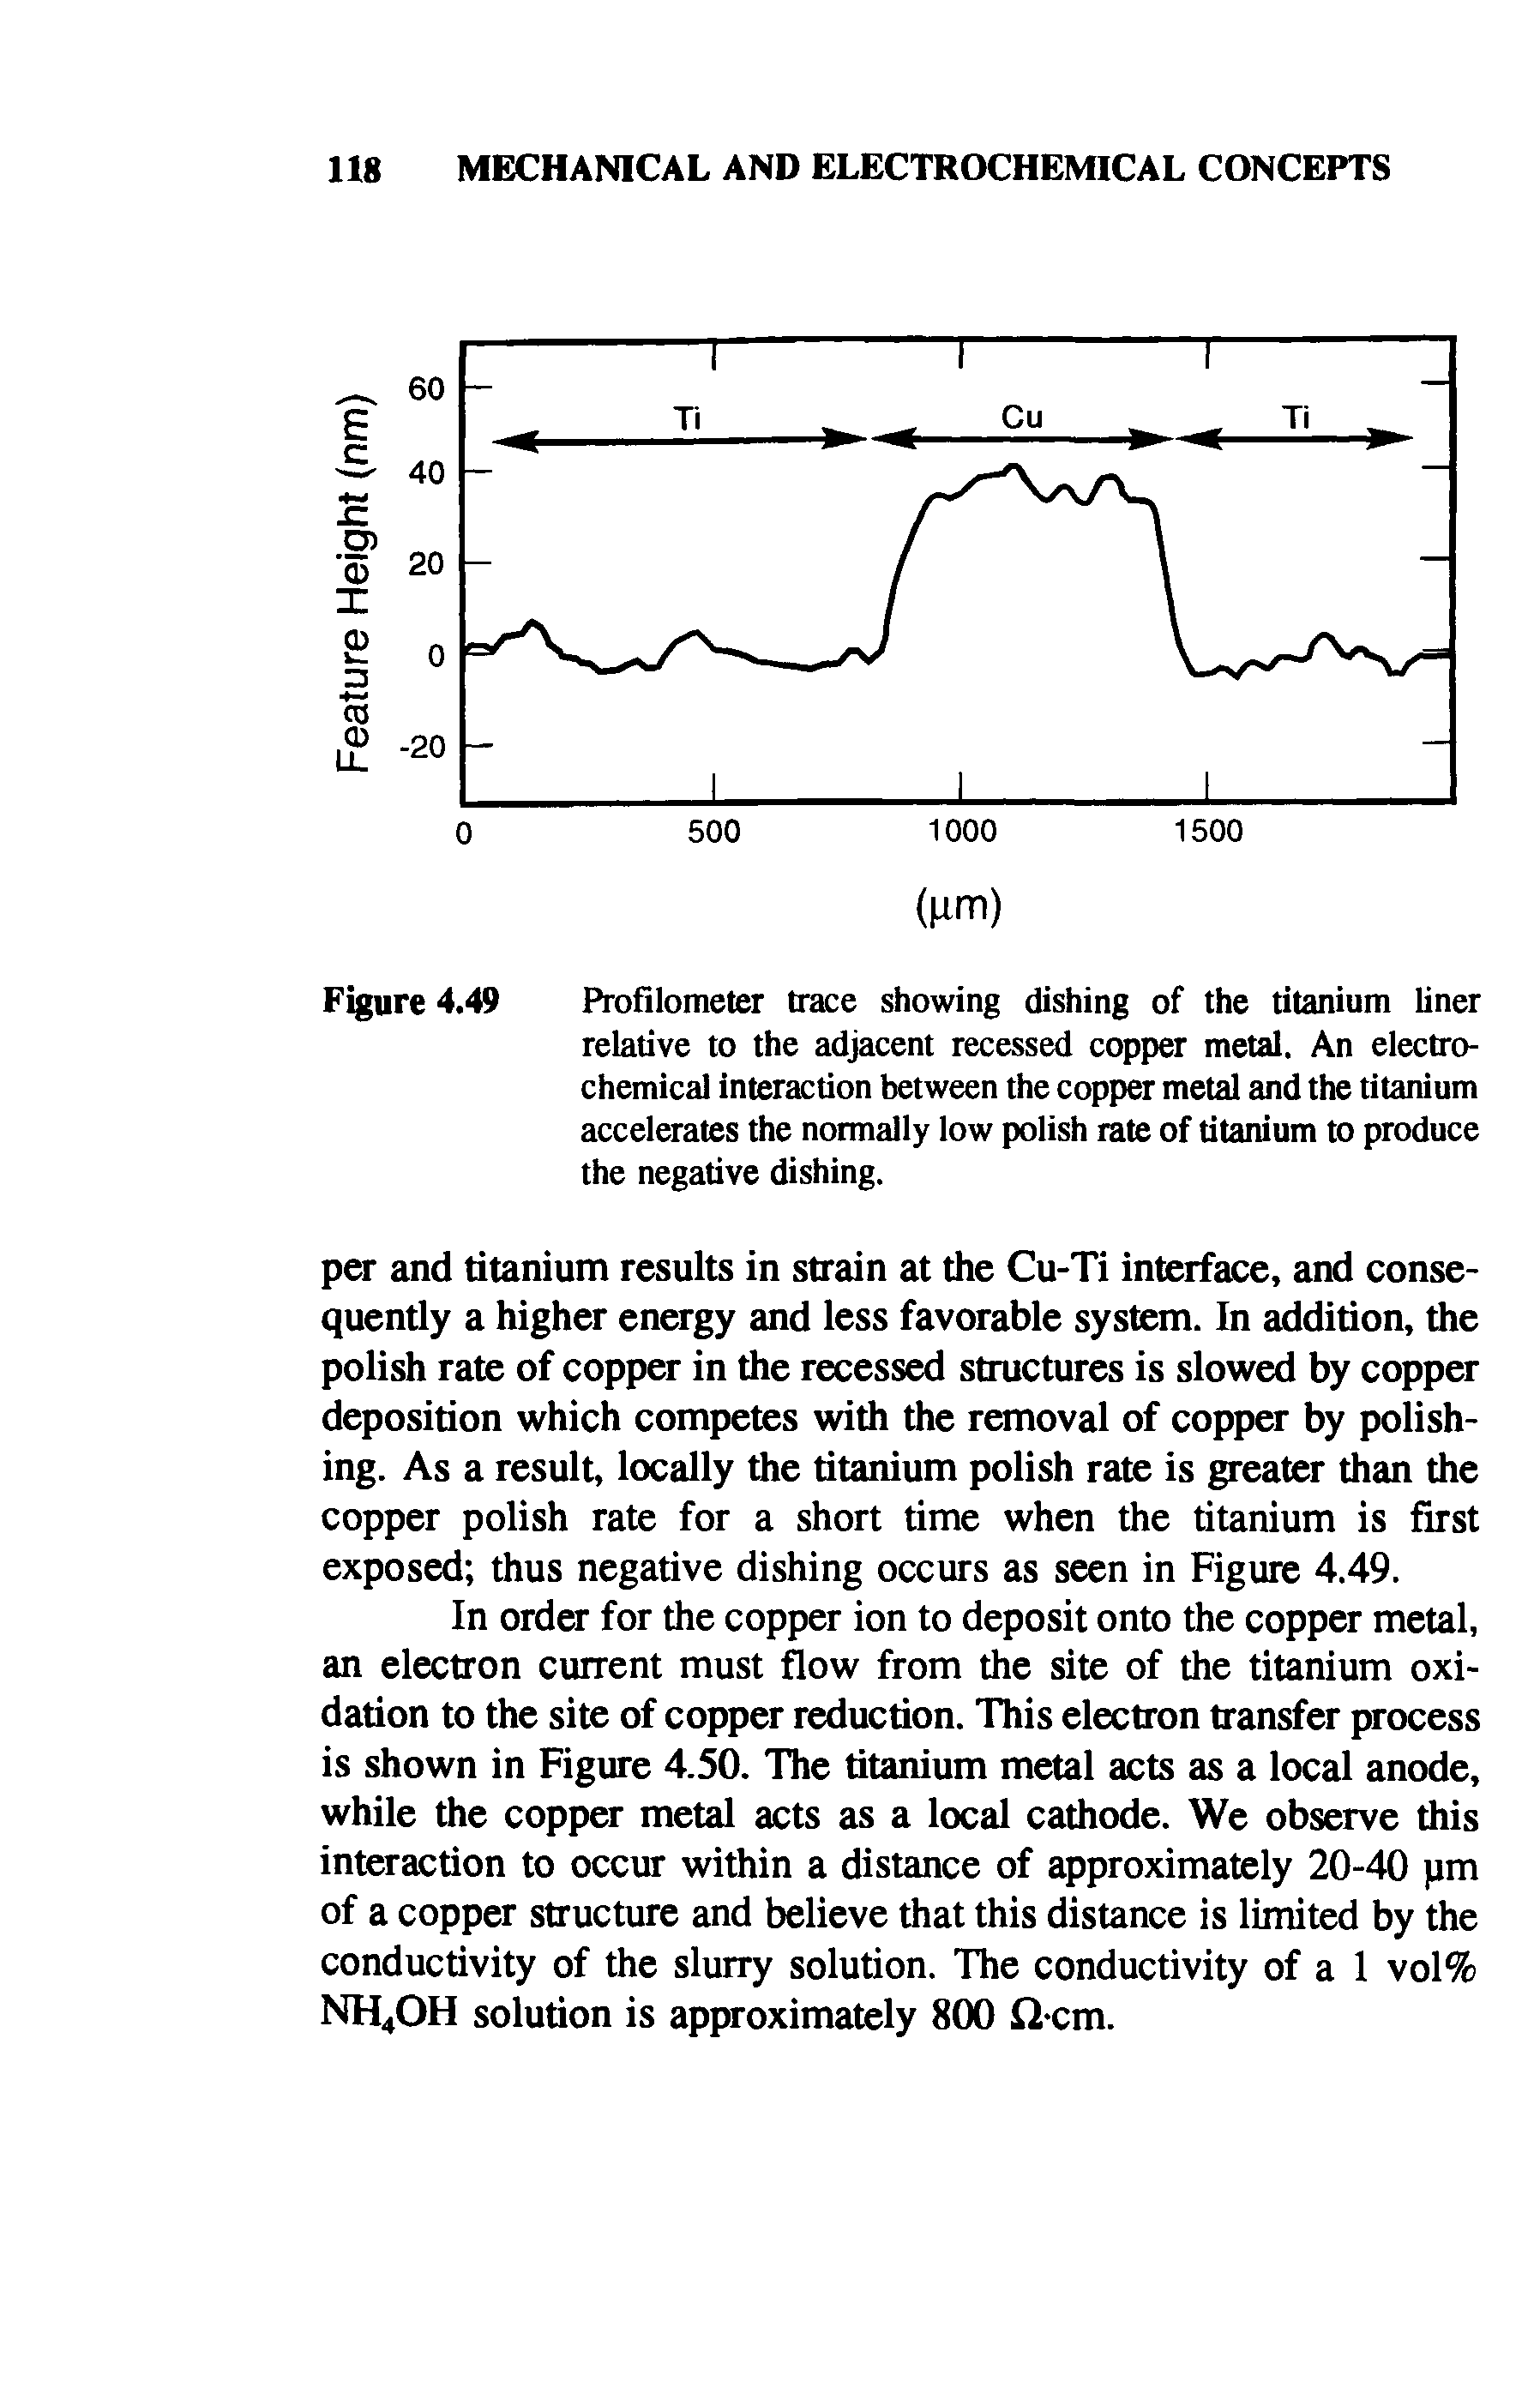 Figure 4.49 Profilometer trace showing dishing of the titanium liner relative to the adjacent recessed copper metal. An electrochemical interaction between the copper metal and the titanium accelerates the normally low polish rate of titanium to produce the negative dishing.